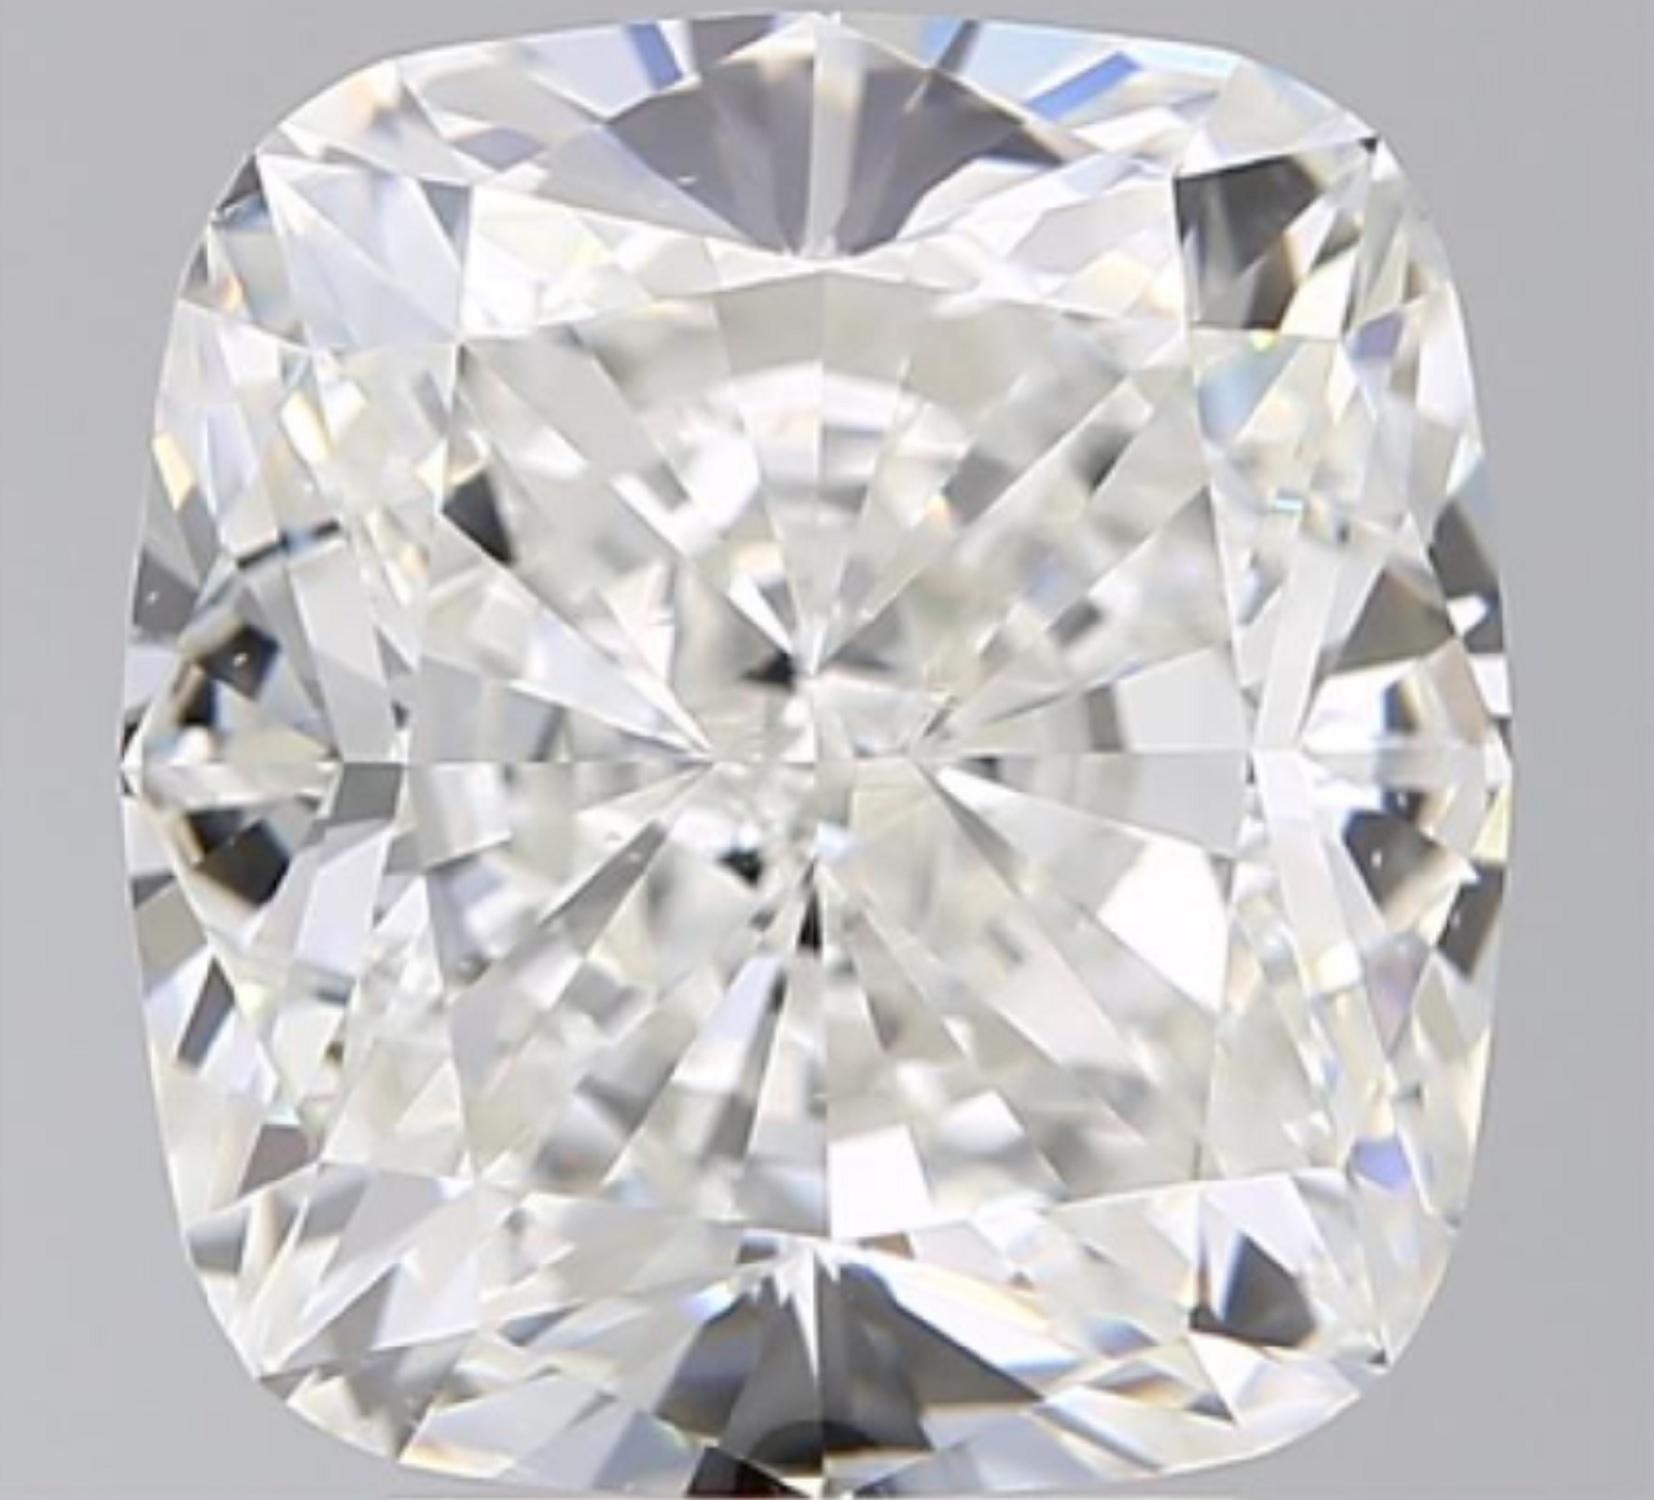 This gorgeous 4.03 Carat GIA certified cushion cut diamond ring is completely eye clean, bright white, and it sparkles stunningly with vibrant brilliance! Well cut, the diamond’s sparkle is bright and well defined rather than the crushed ice look